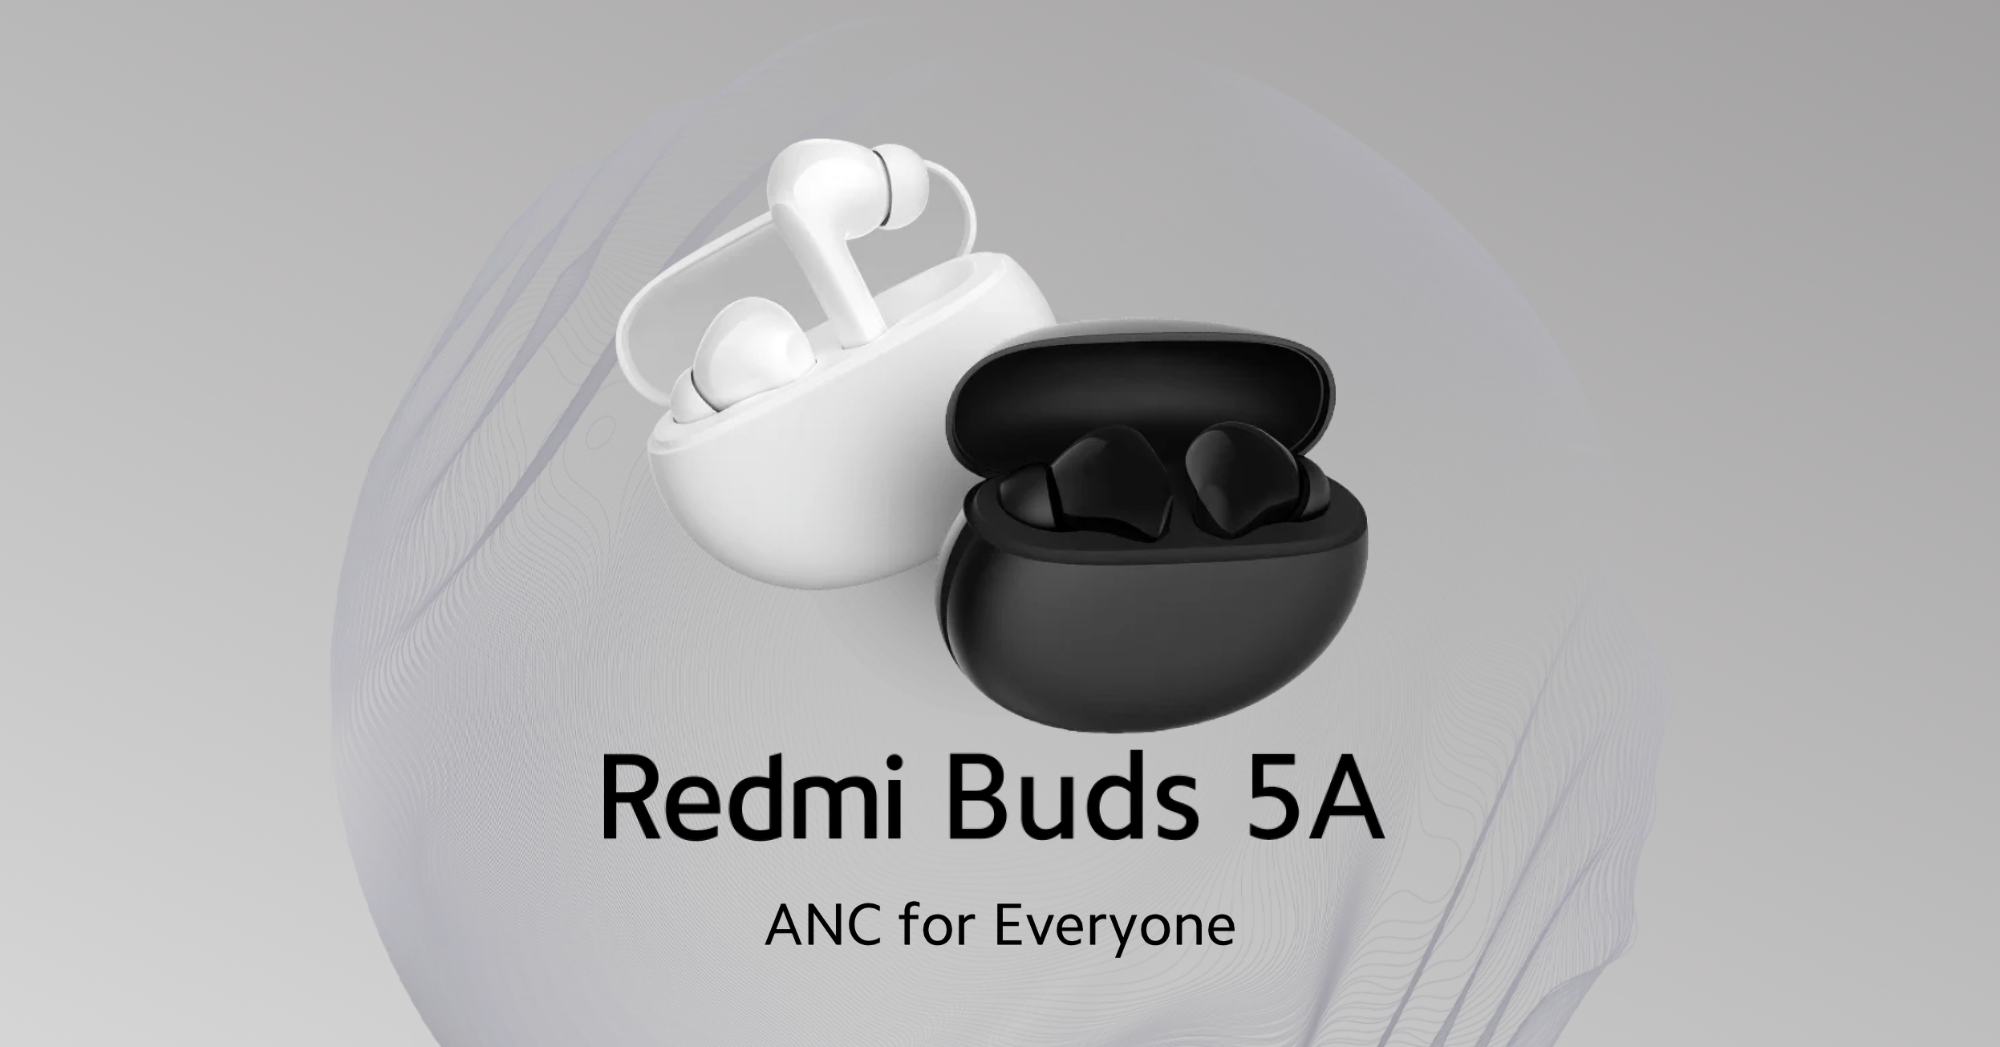 Redmi Buds 5C: ANC, Bluetooth 5.3, IPX4 protection, up to 36 hours of battery life and Google Fast Pair support for $24